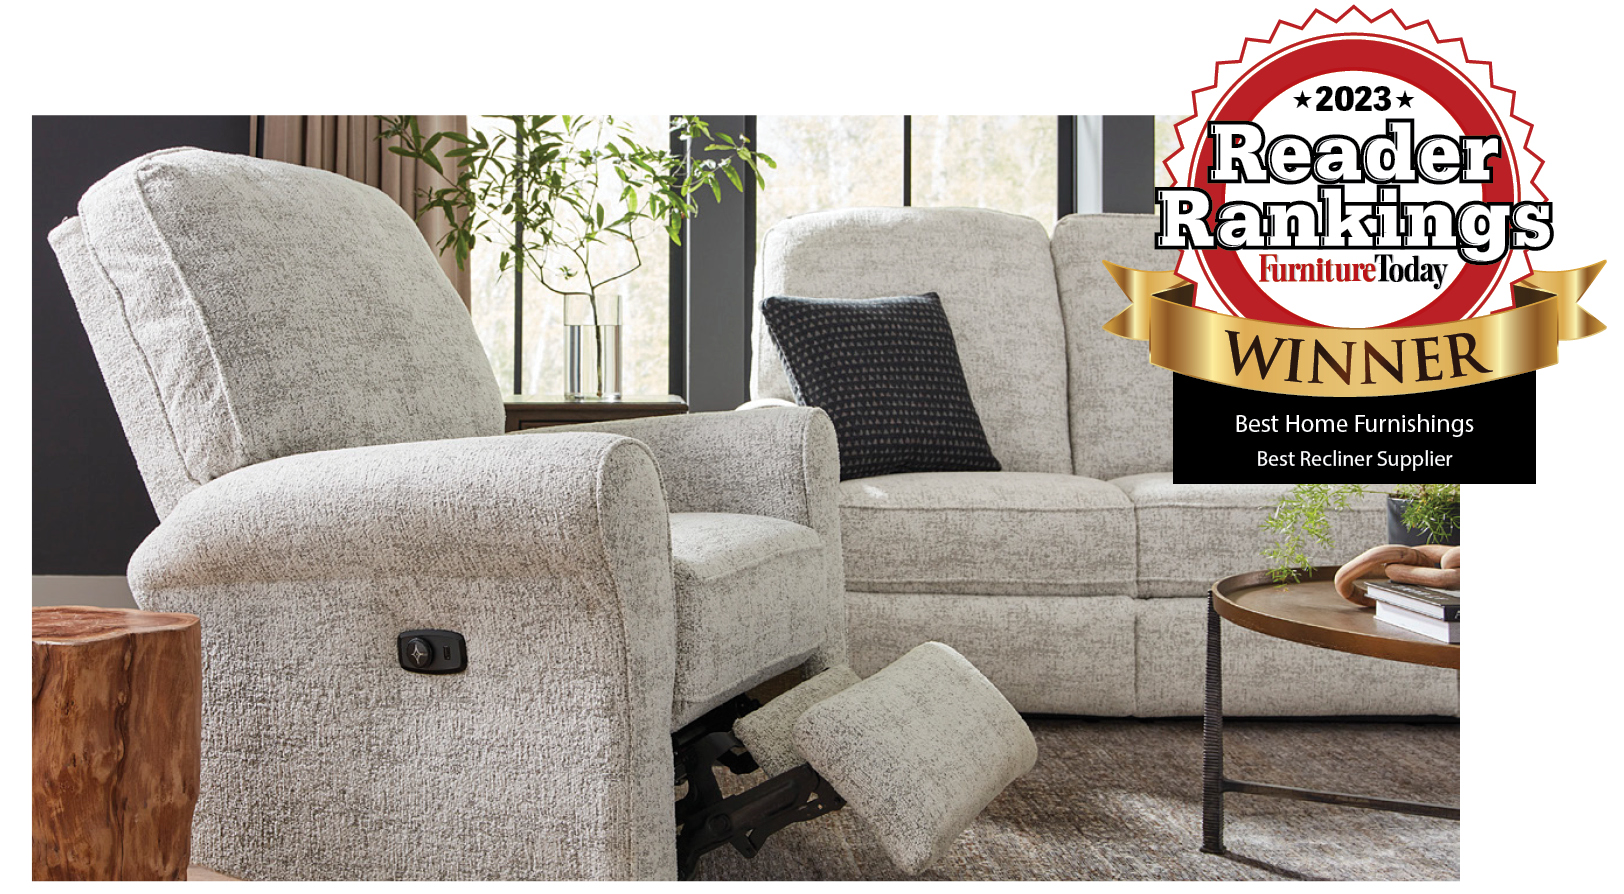 Best Recliner Supplier Two Years in a Row!